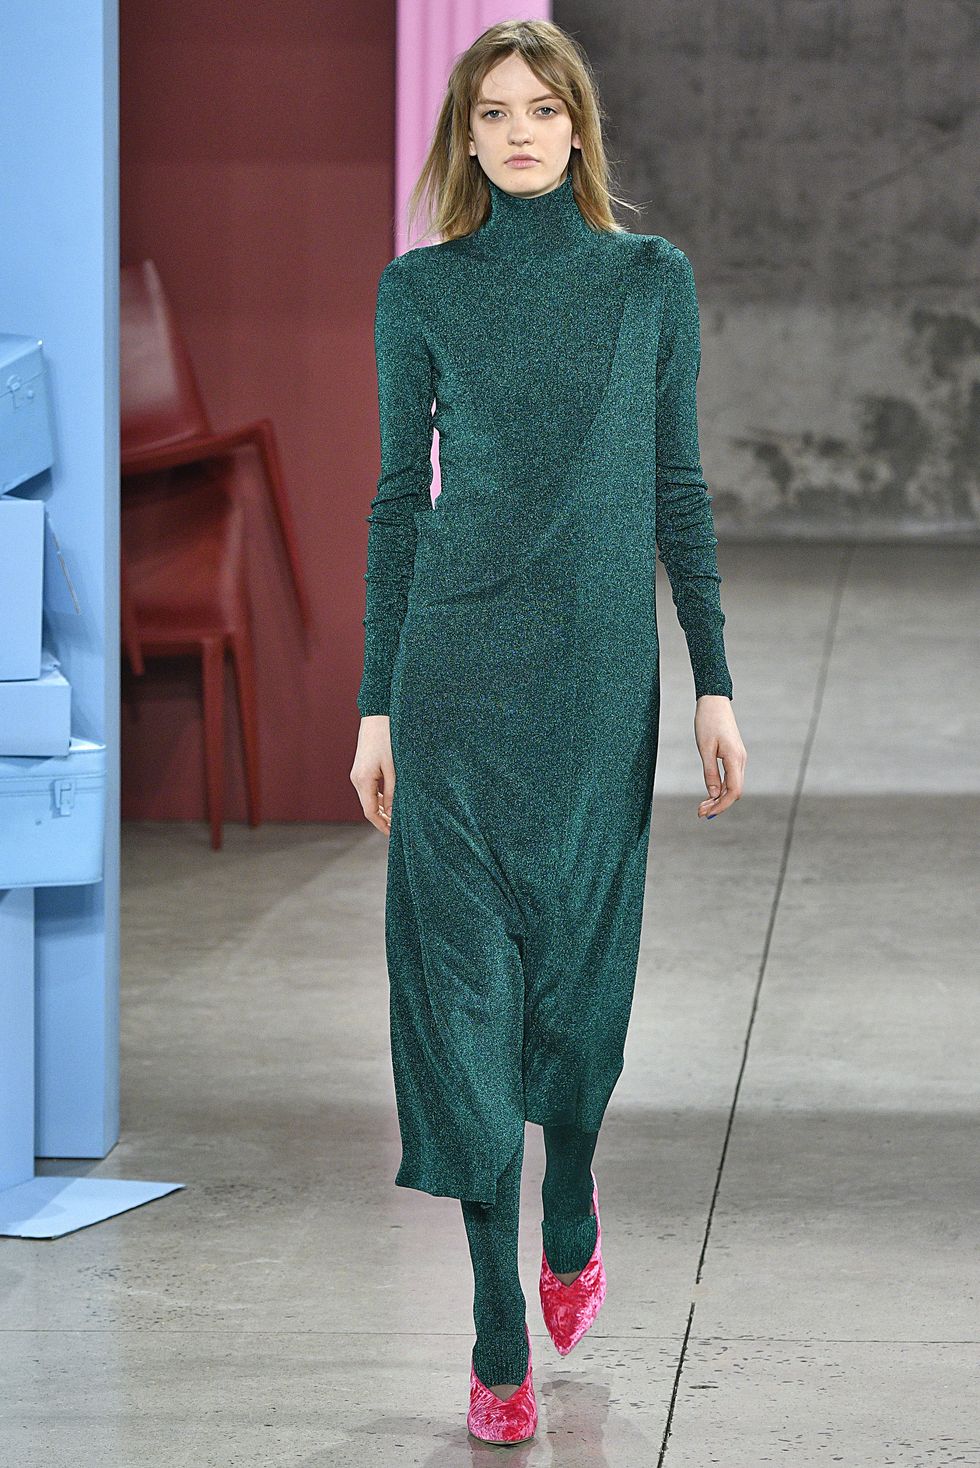 <p>Speaking of Tibi, chic water-bearers will be down with the&nbsp;interesting silhouettes the brand showed earlier this week. The standout? A tea-length Lurex sheath worn with <a href="http://www.marieclaire.com/fashion/news/a22901/stirrup-pant-trend/" target="_blank" data-tracking-id="recirc-text-link">those troublesome stirrup pants</a> underneath.&nbsp;</p>